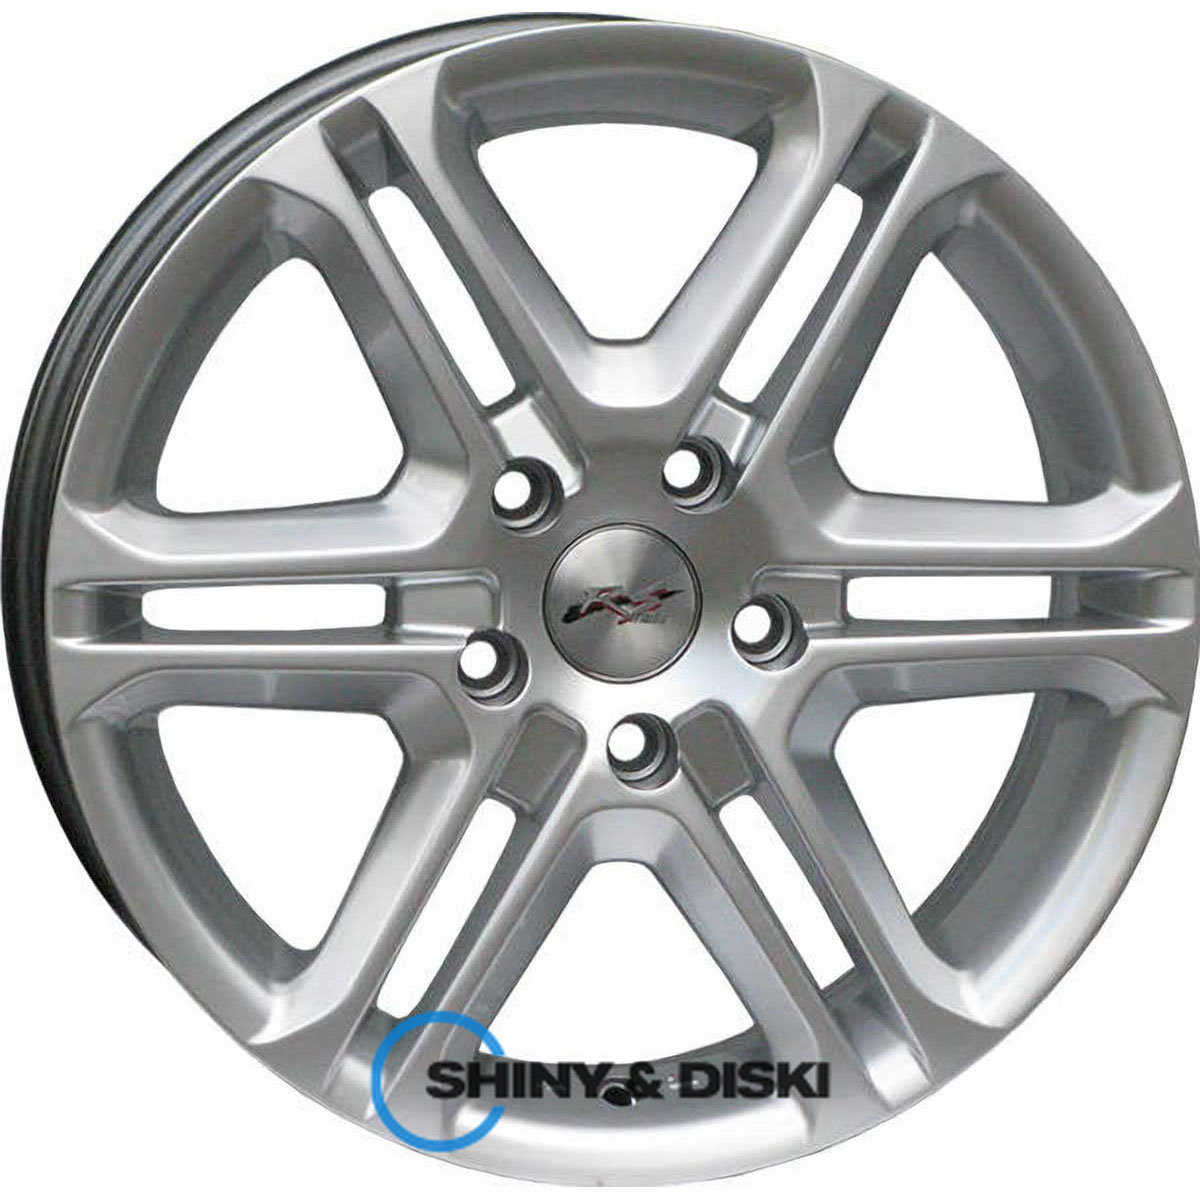 rs tuning 789 hs r15 w6.5 pcd5x100 et38 dia57.1